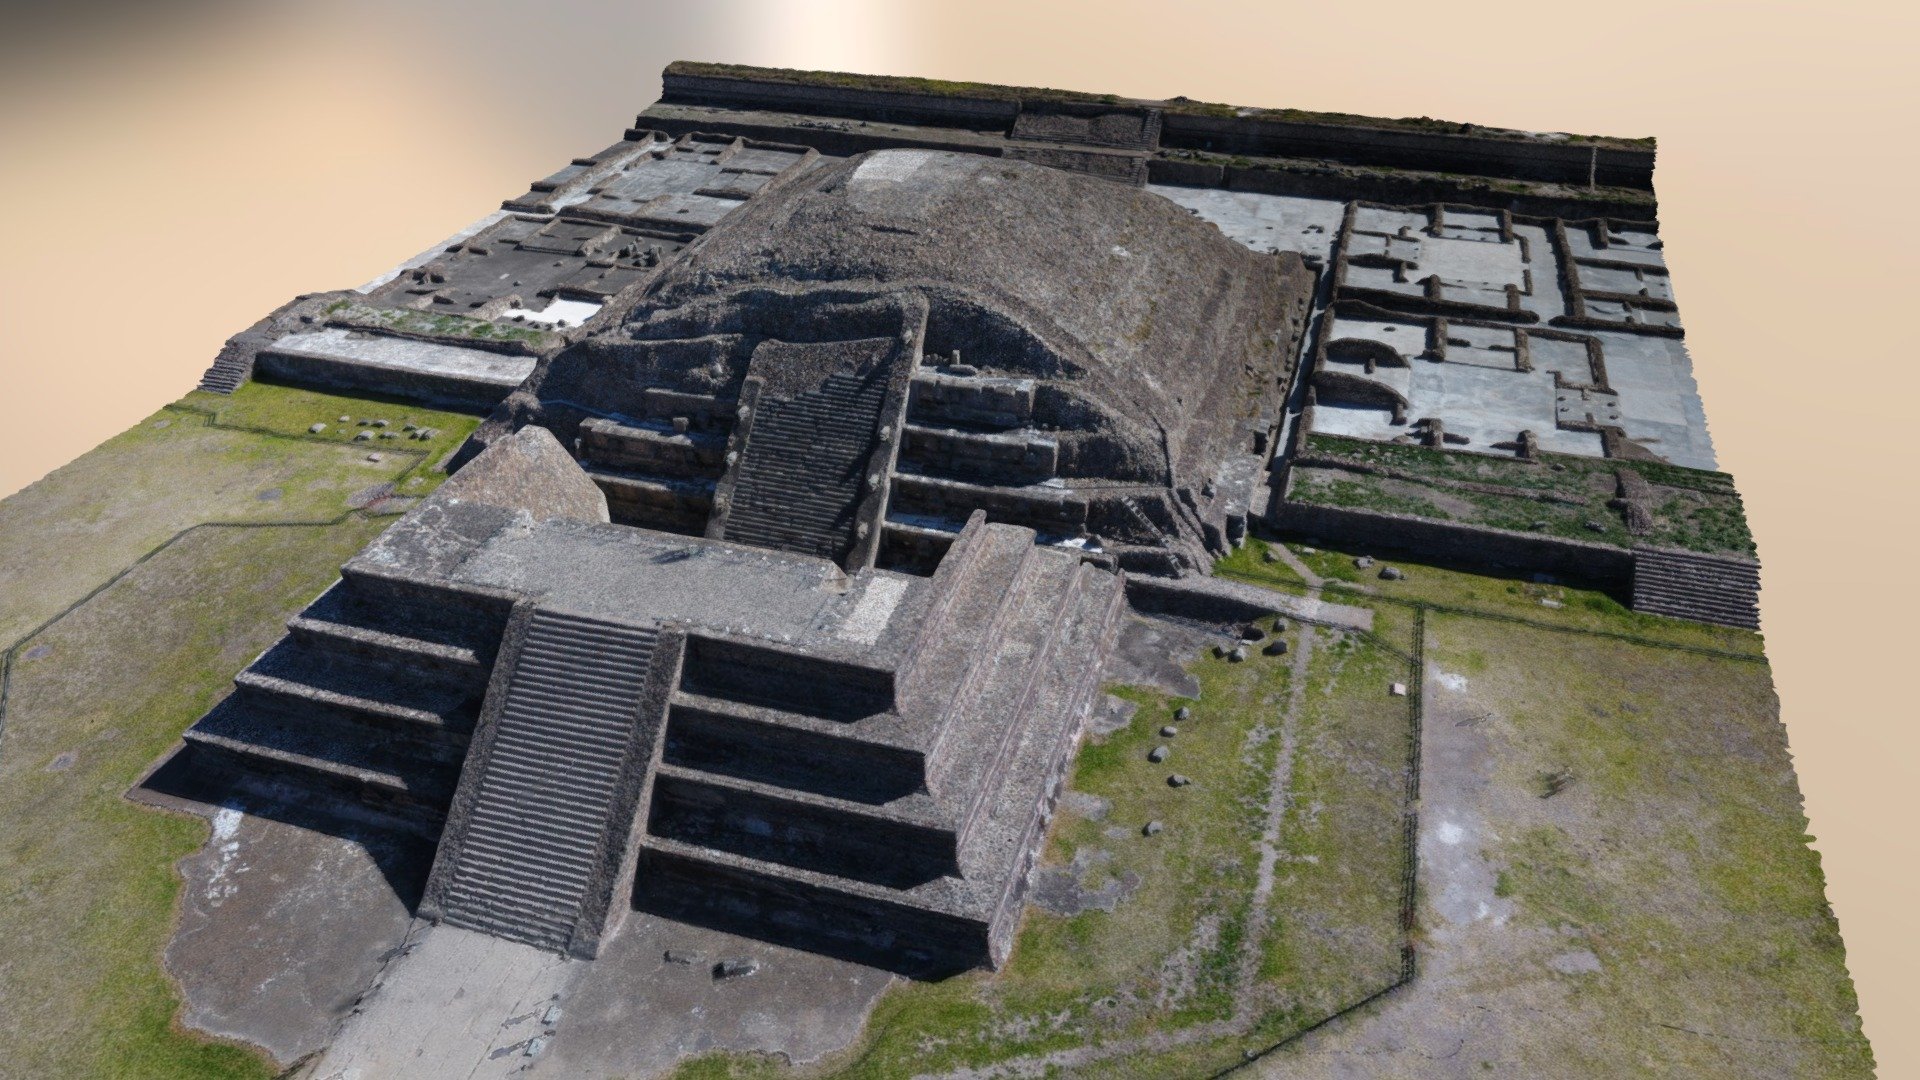 Detail of Piramid of Pyramid of Quetzalcoatl in the Ciudadela of Teotihuacan.
 Dr. Gerardo Gutierrez, CU Boulder Anthropology, Project Map, in collaboration with Dr. Sergio Gomez, Project Ciudadela, INAH; an Antropología Chinampera 3d model